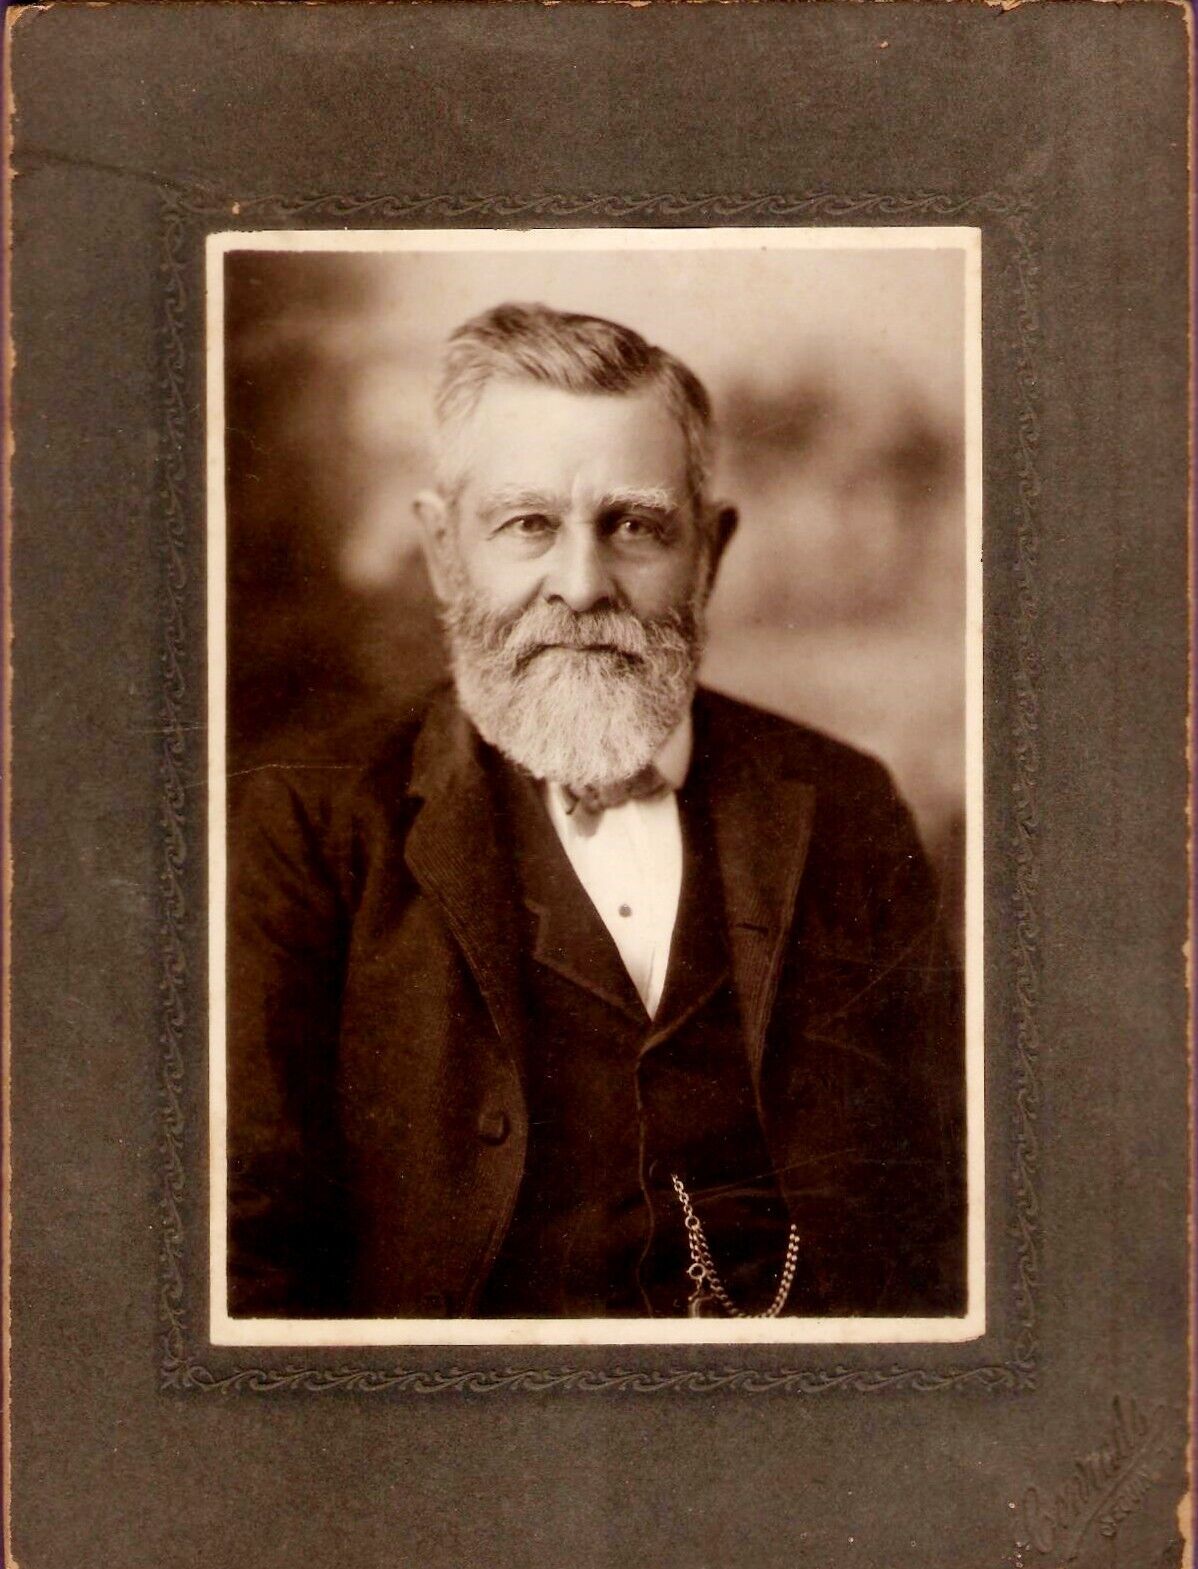 Seguin Texas Cabinet Card of an Old Man with Pocket Watch